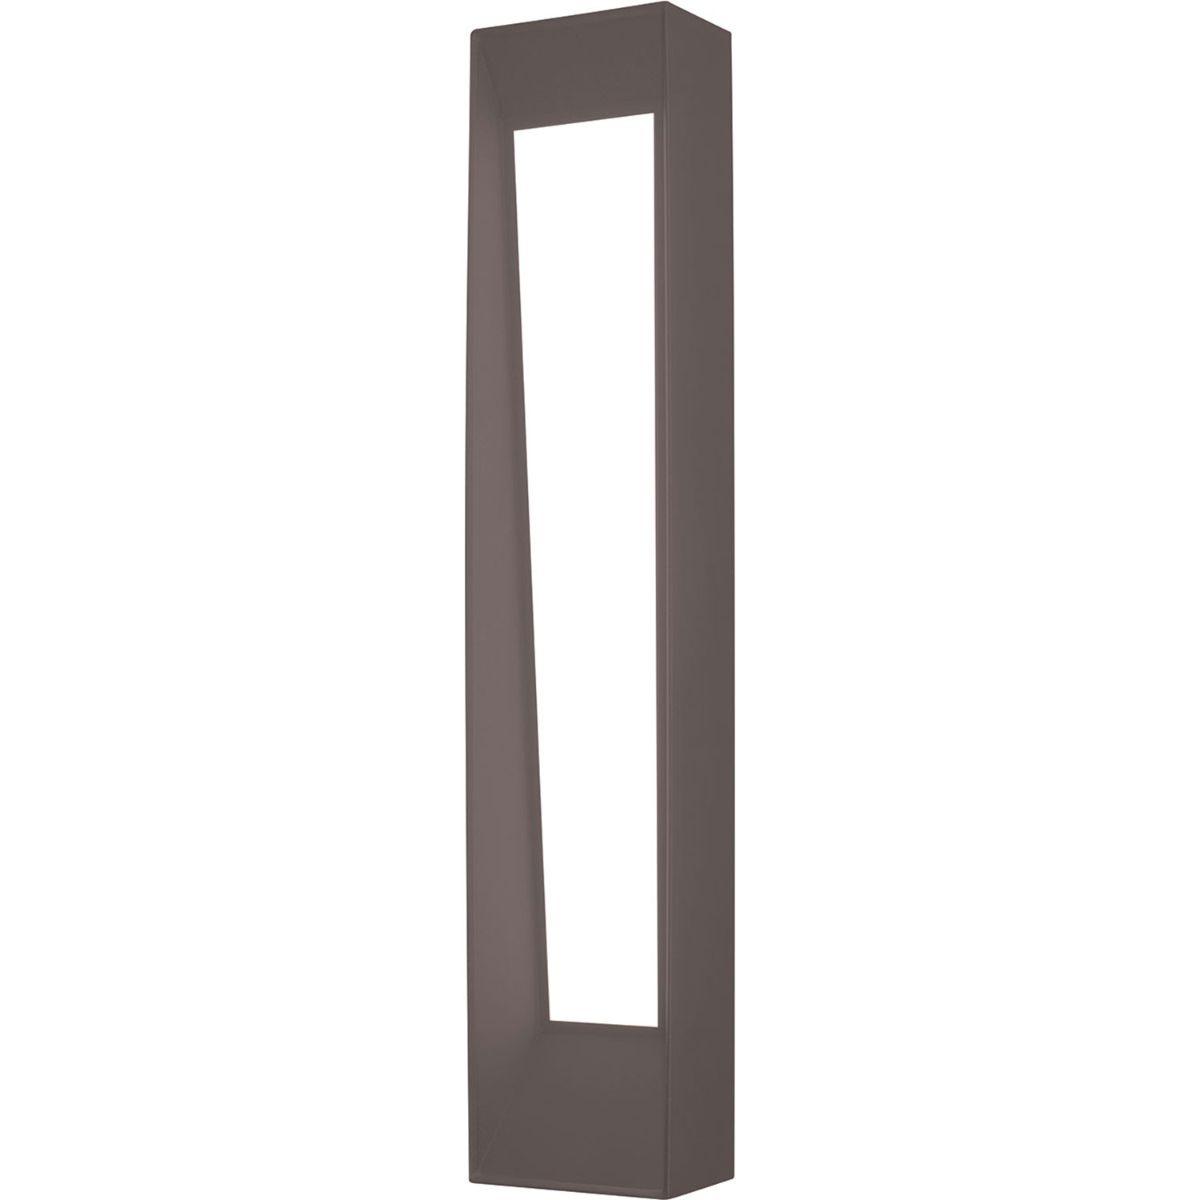 Rowan 20 in. LED Outdoor Wall Sconce